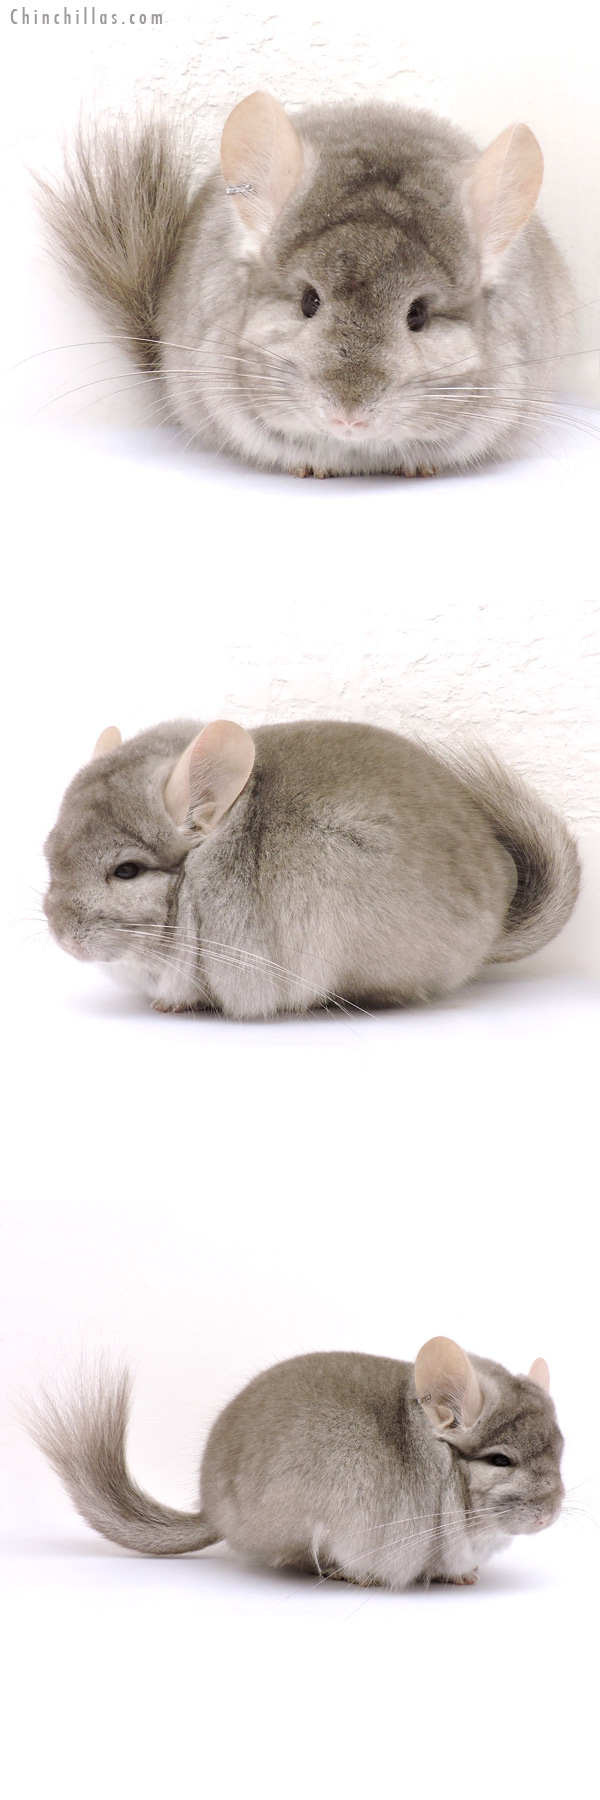 Chinchilla or related item offered for sale or export on Chinchillas.com - 14238 Beige Royal Persian Angora Male Chinchilla